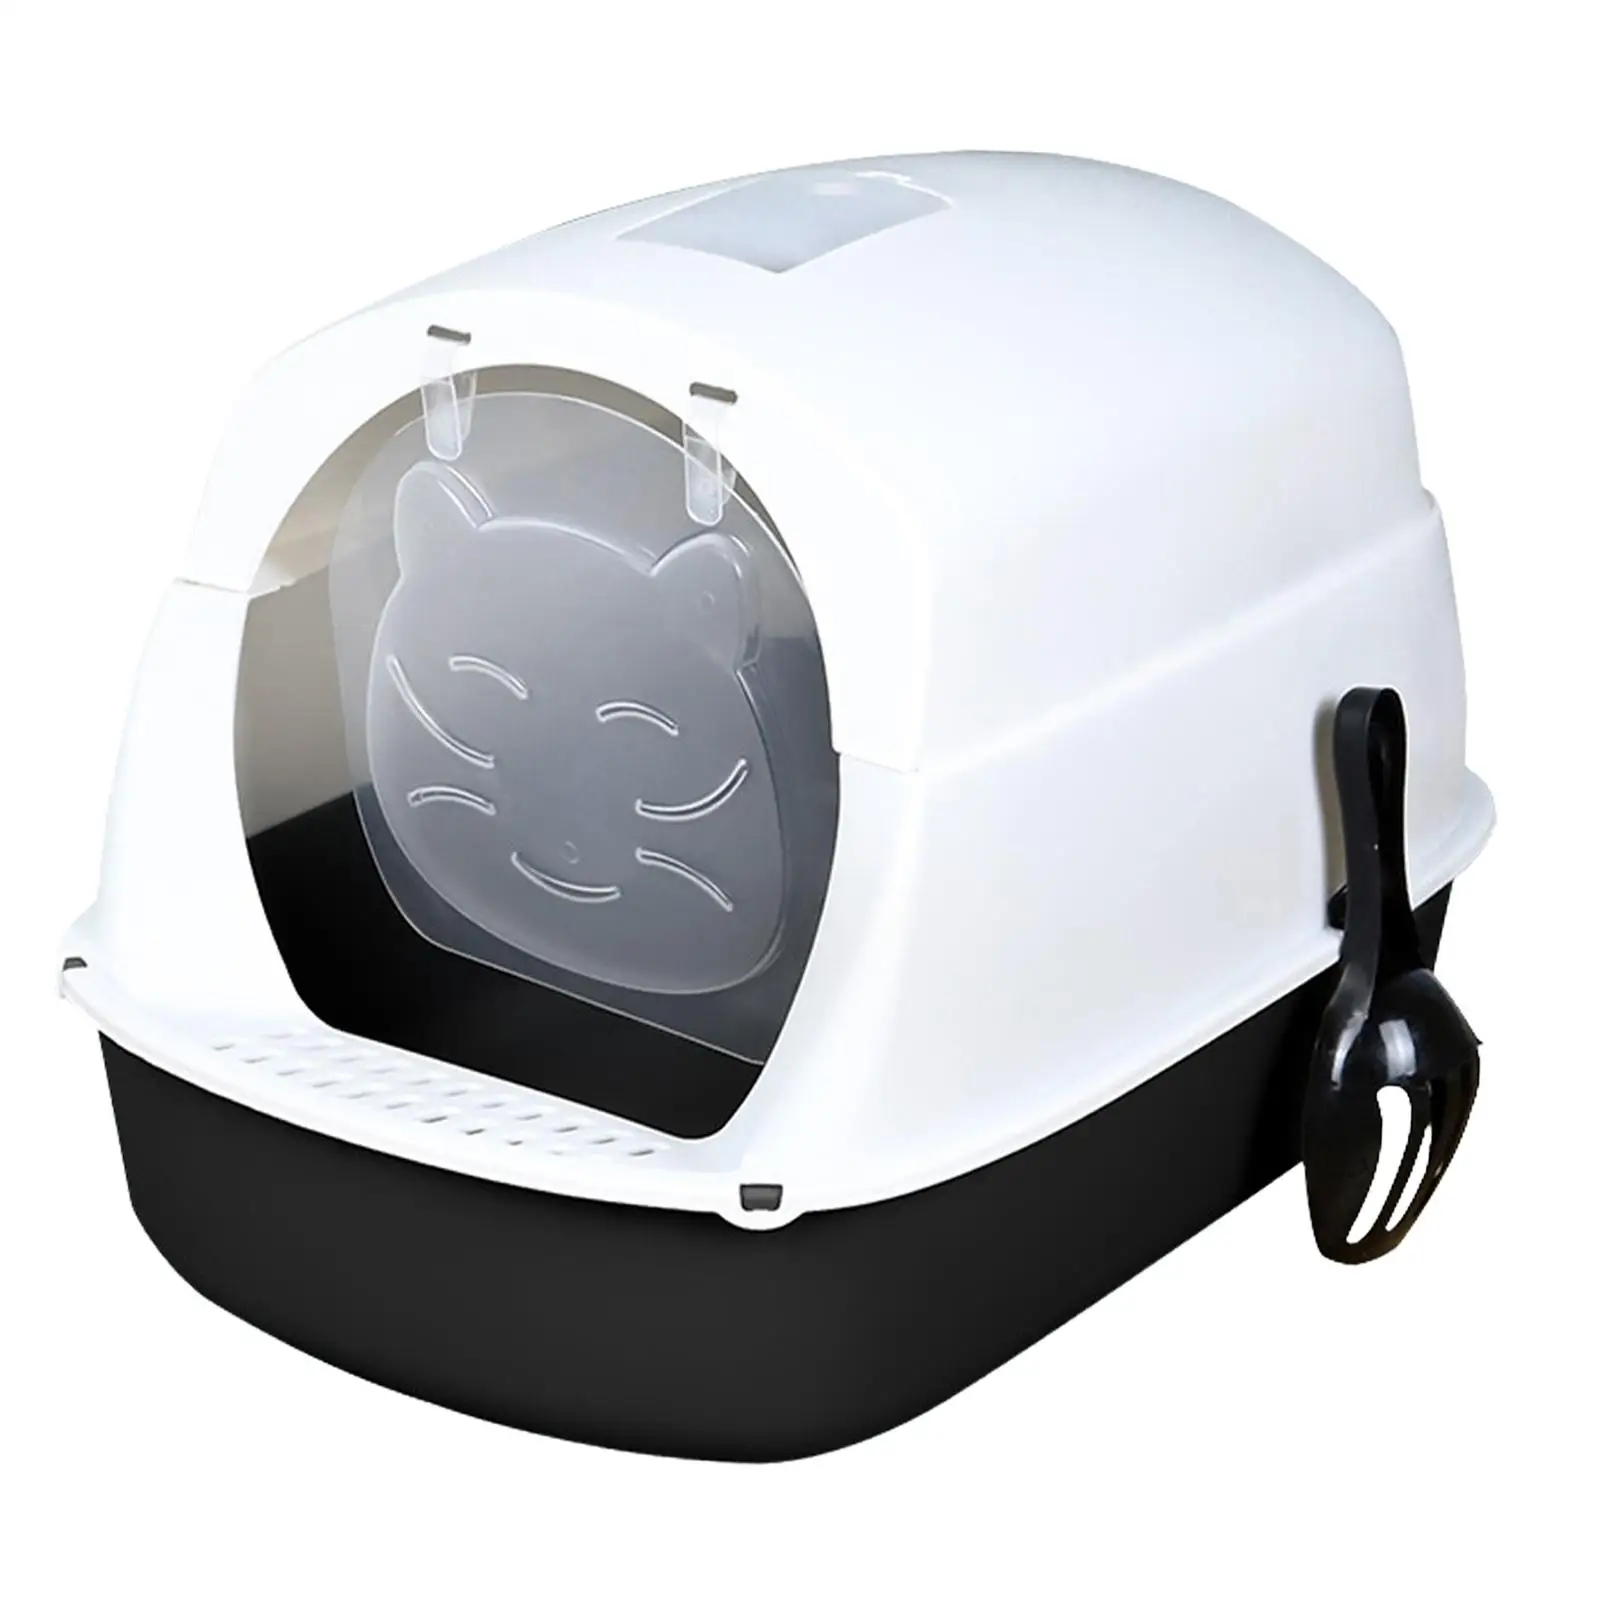 Cat Litter Box with Hood and Lid, Kitten Potty, Enclosed Cat Toilet with Flap